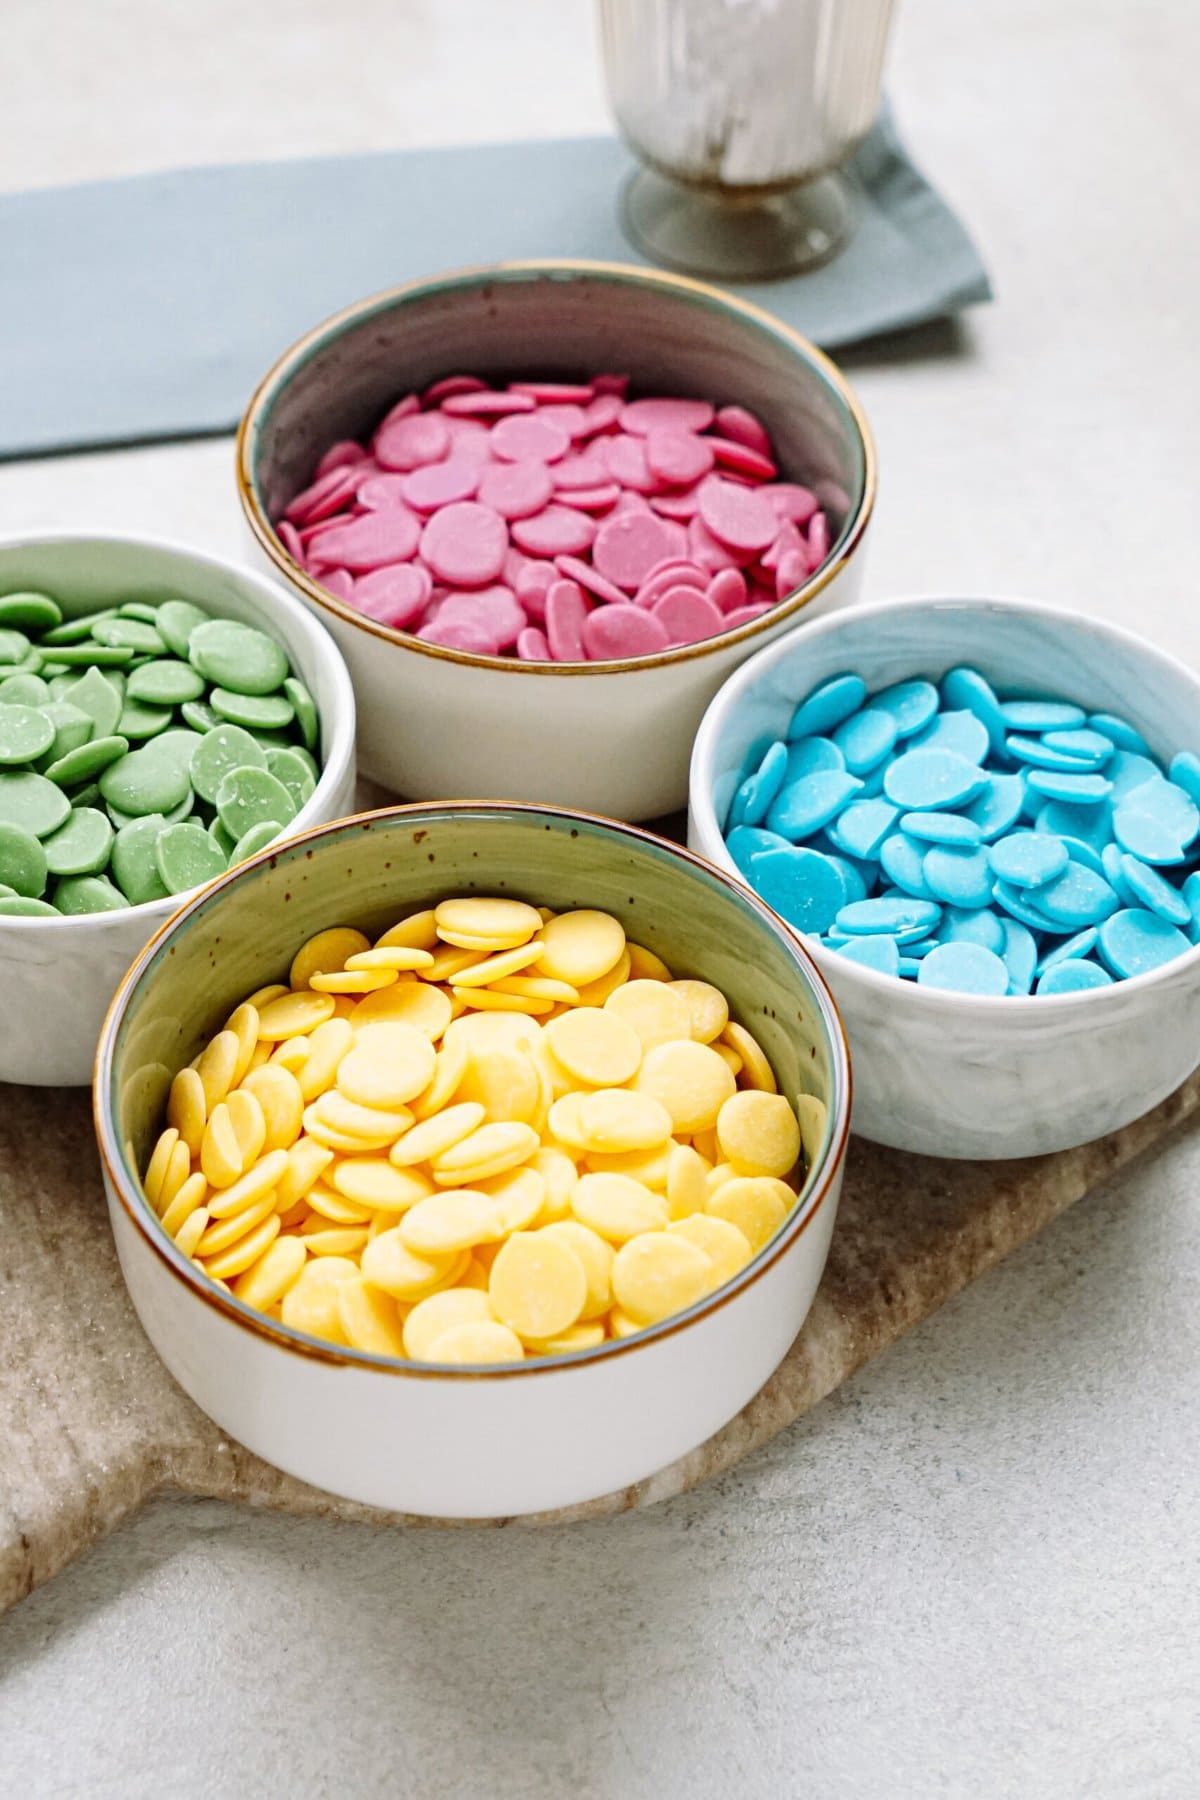 Four bowls filled with colorful candy melts arranged on a countertop.